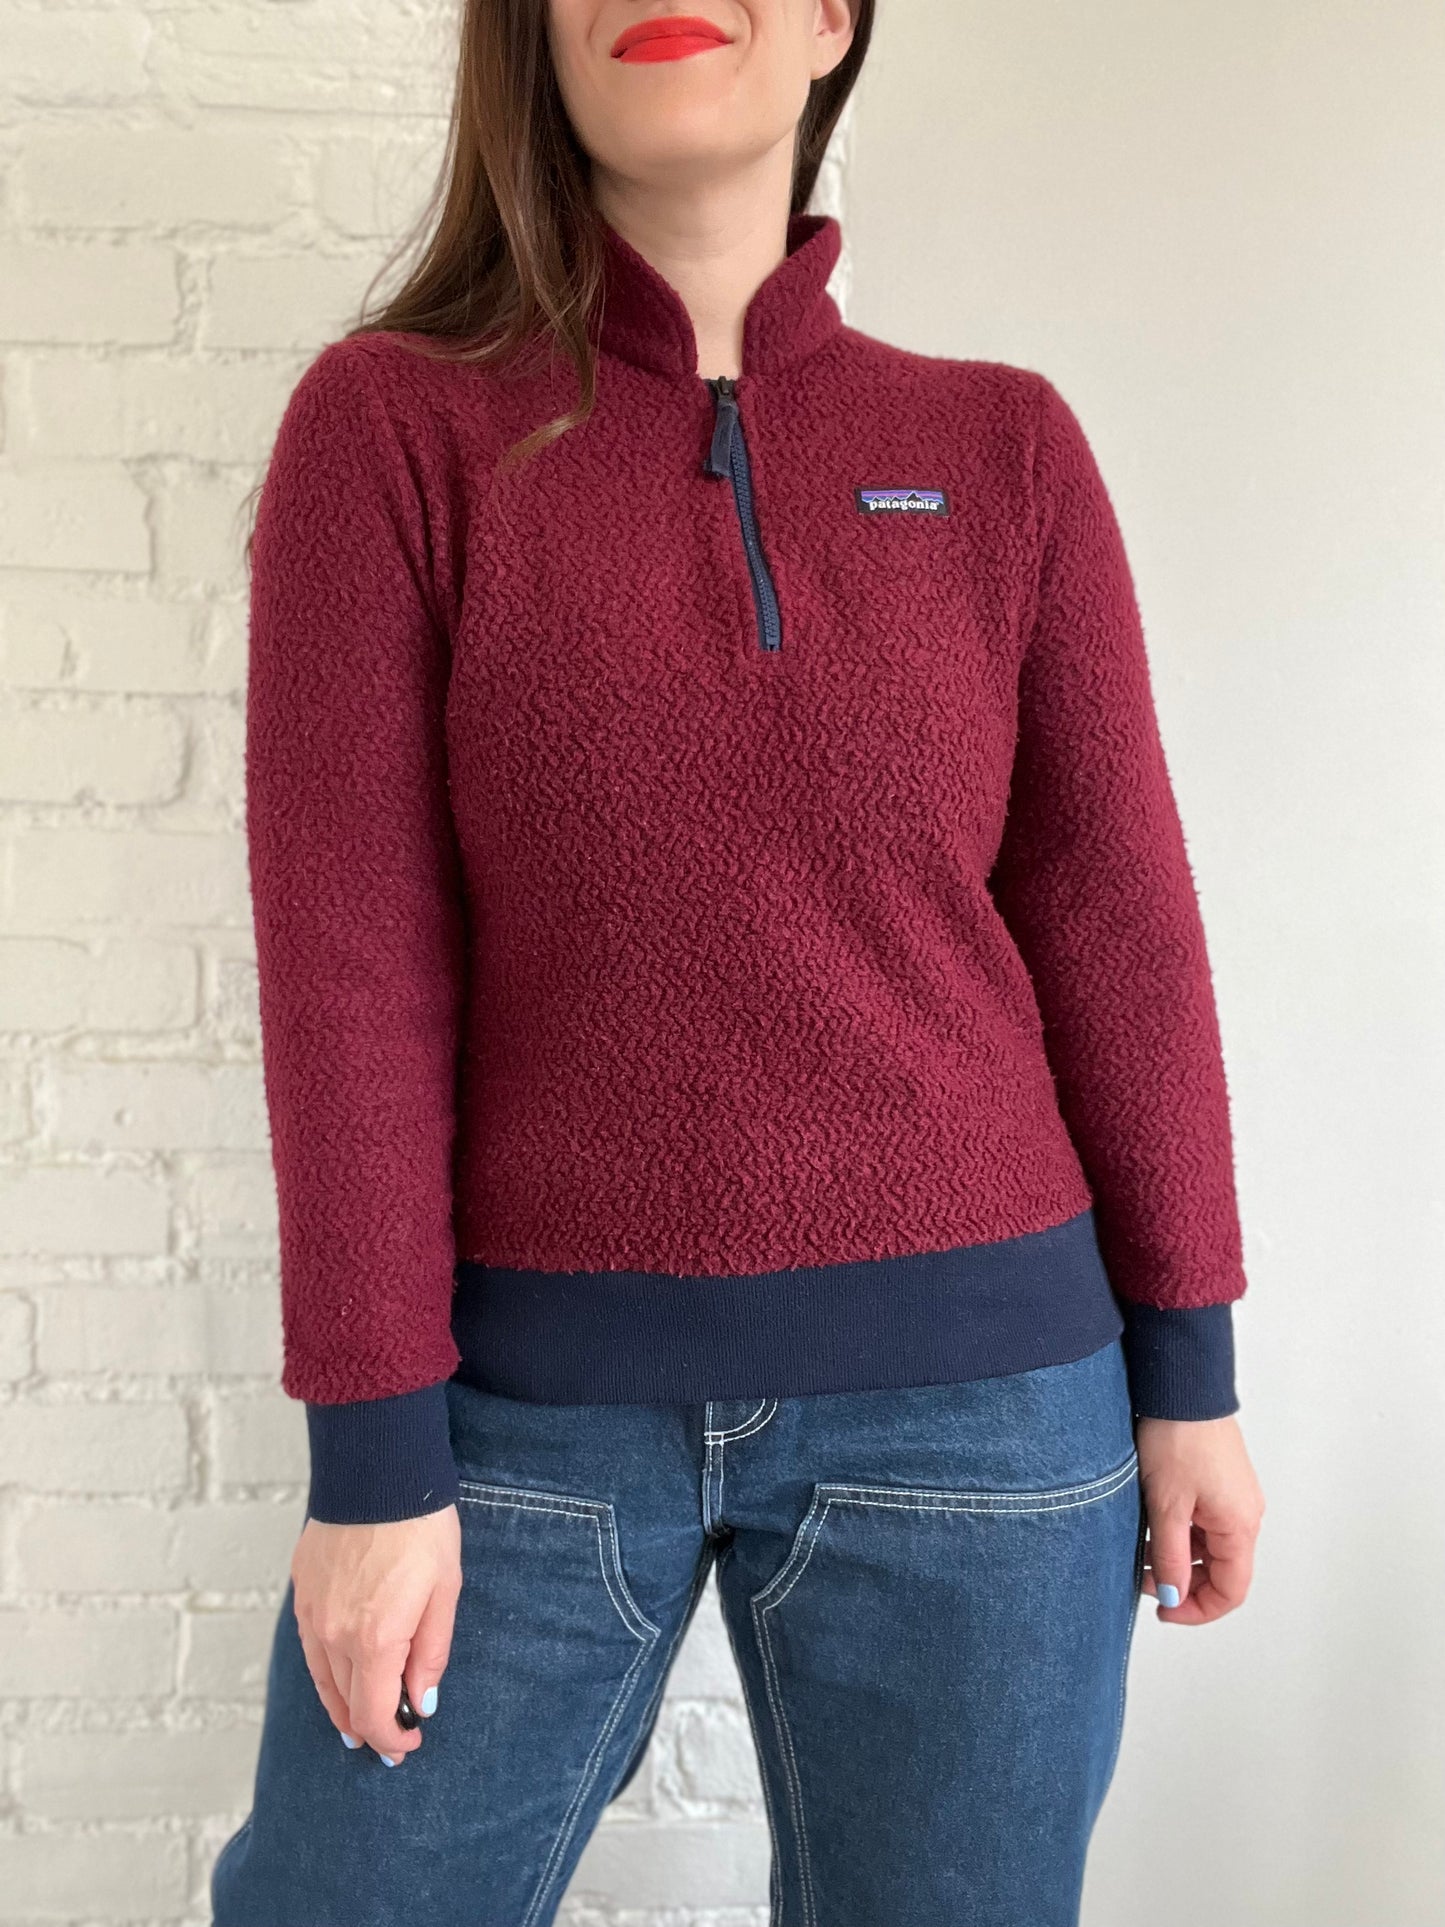 Patagonia Woolyester Fleece Pullover - M